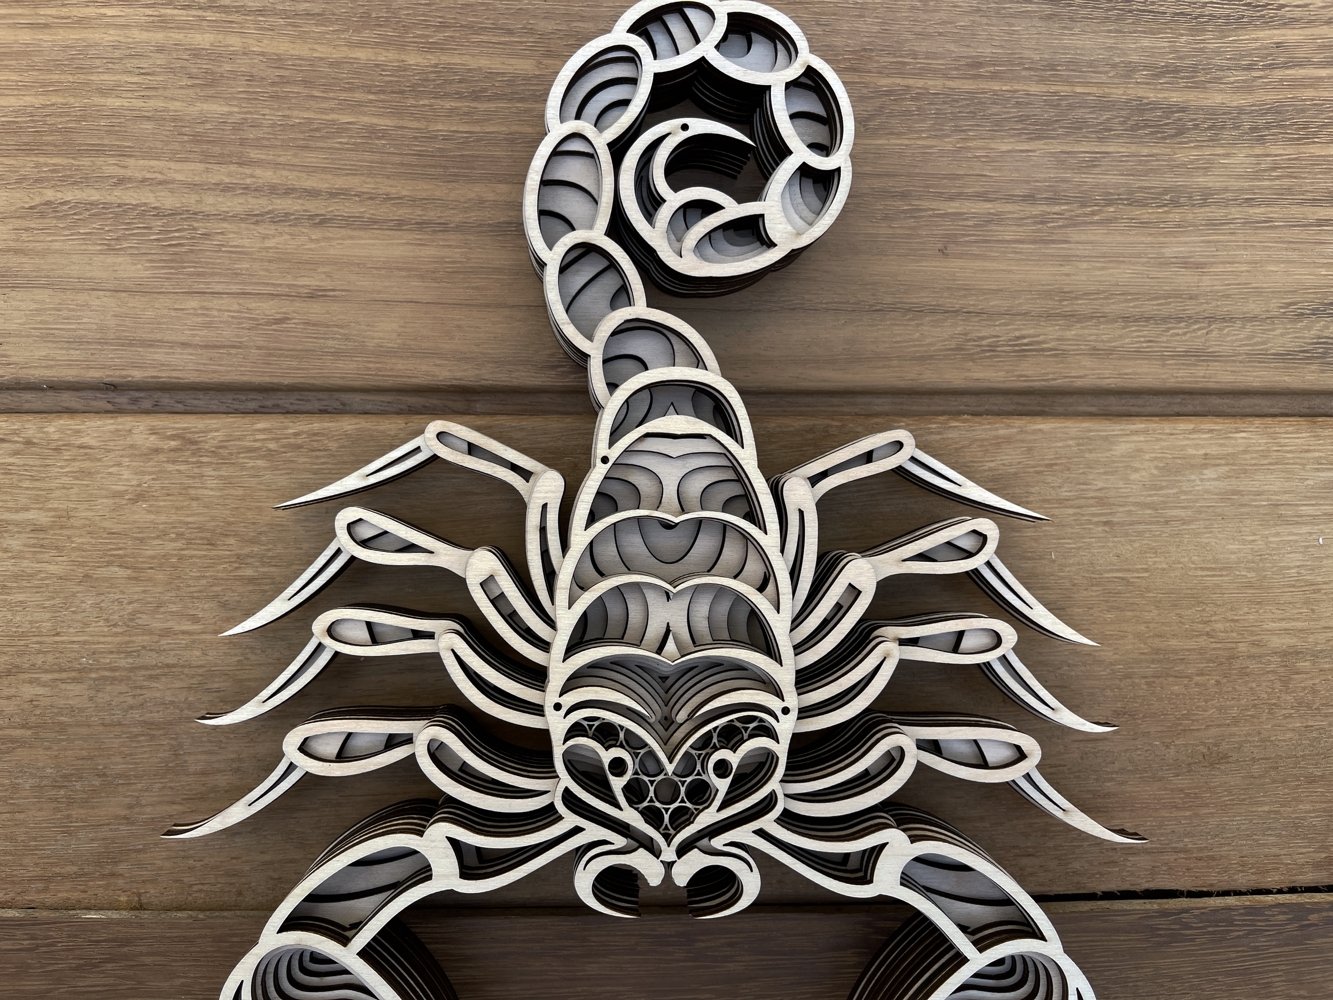 Metal sculpture of a scorpion on a wooden surface.